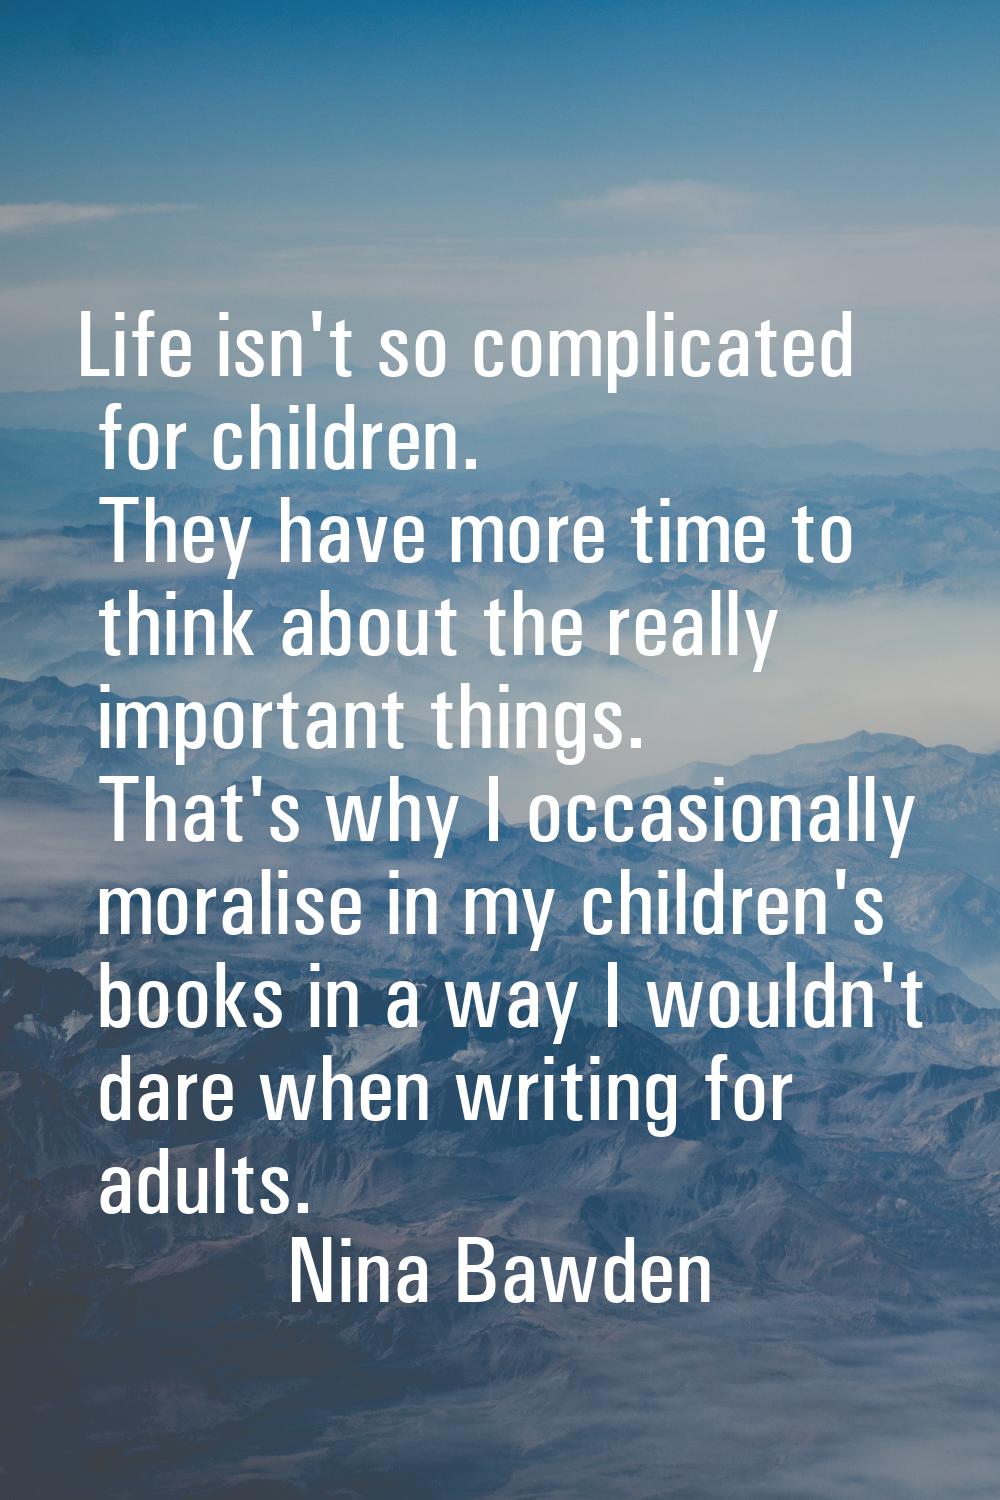 Life isn't so complicated for children. They have more time to think about the really important thi